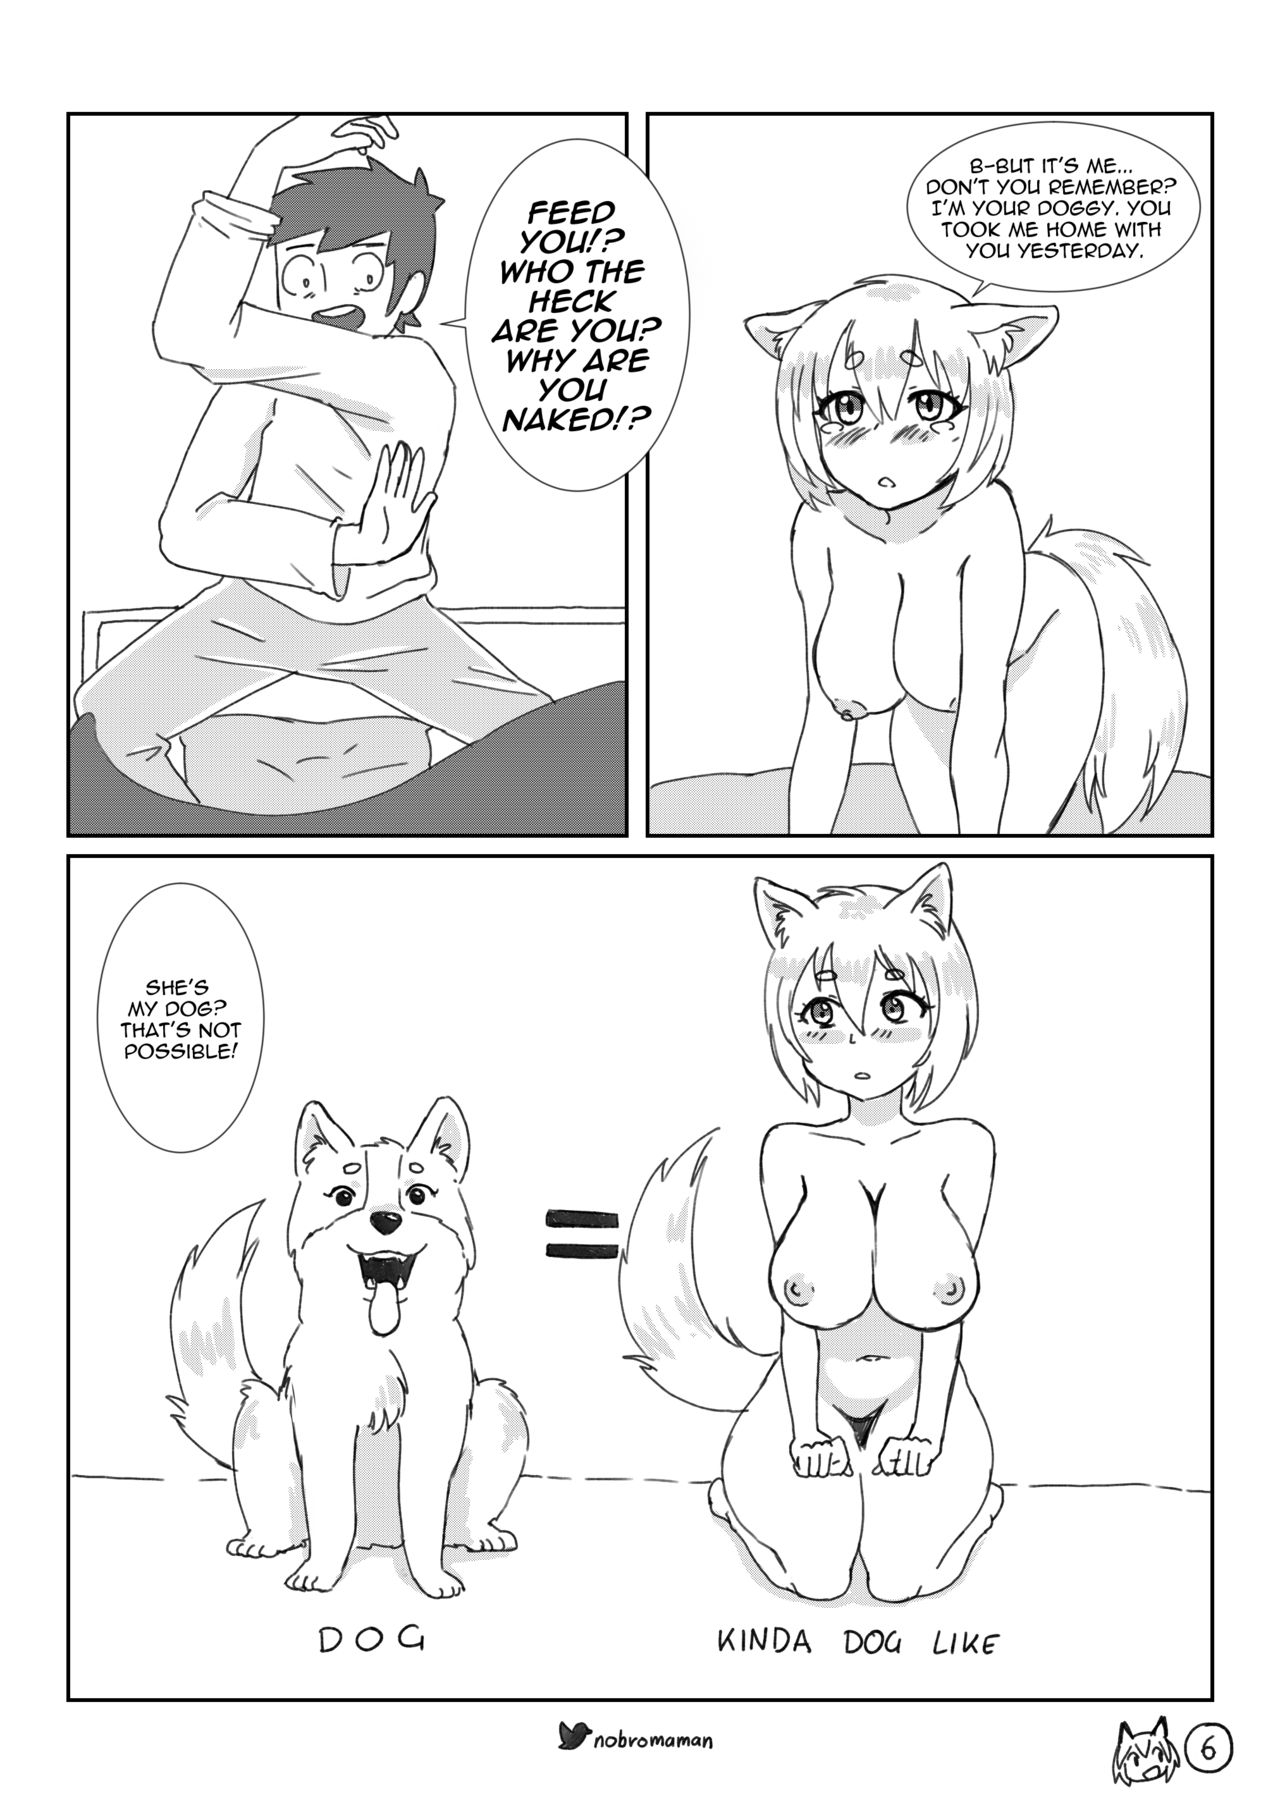 Life with a dog girl - Chapter1 (ongoing) 6